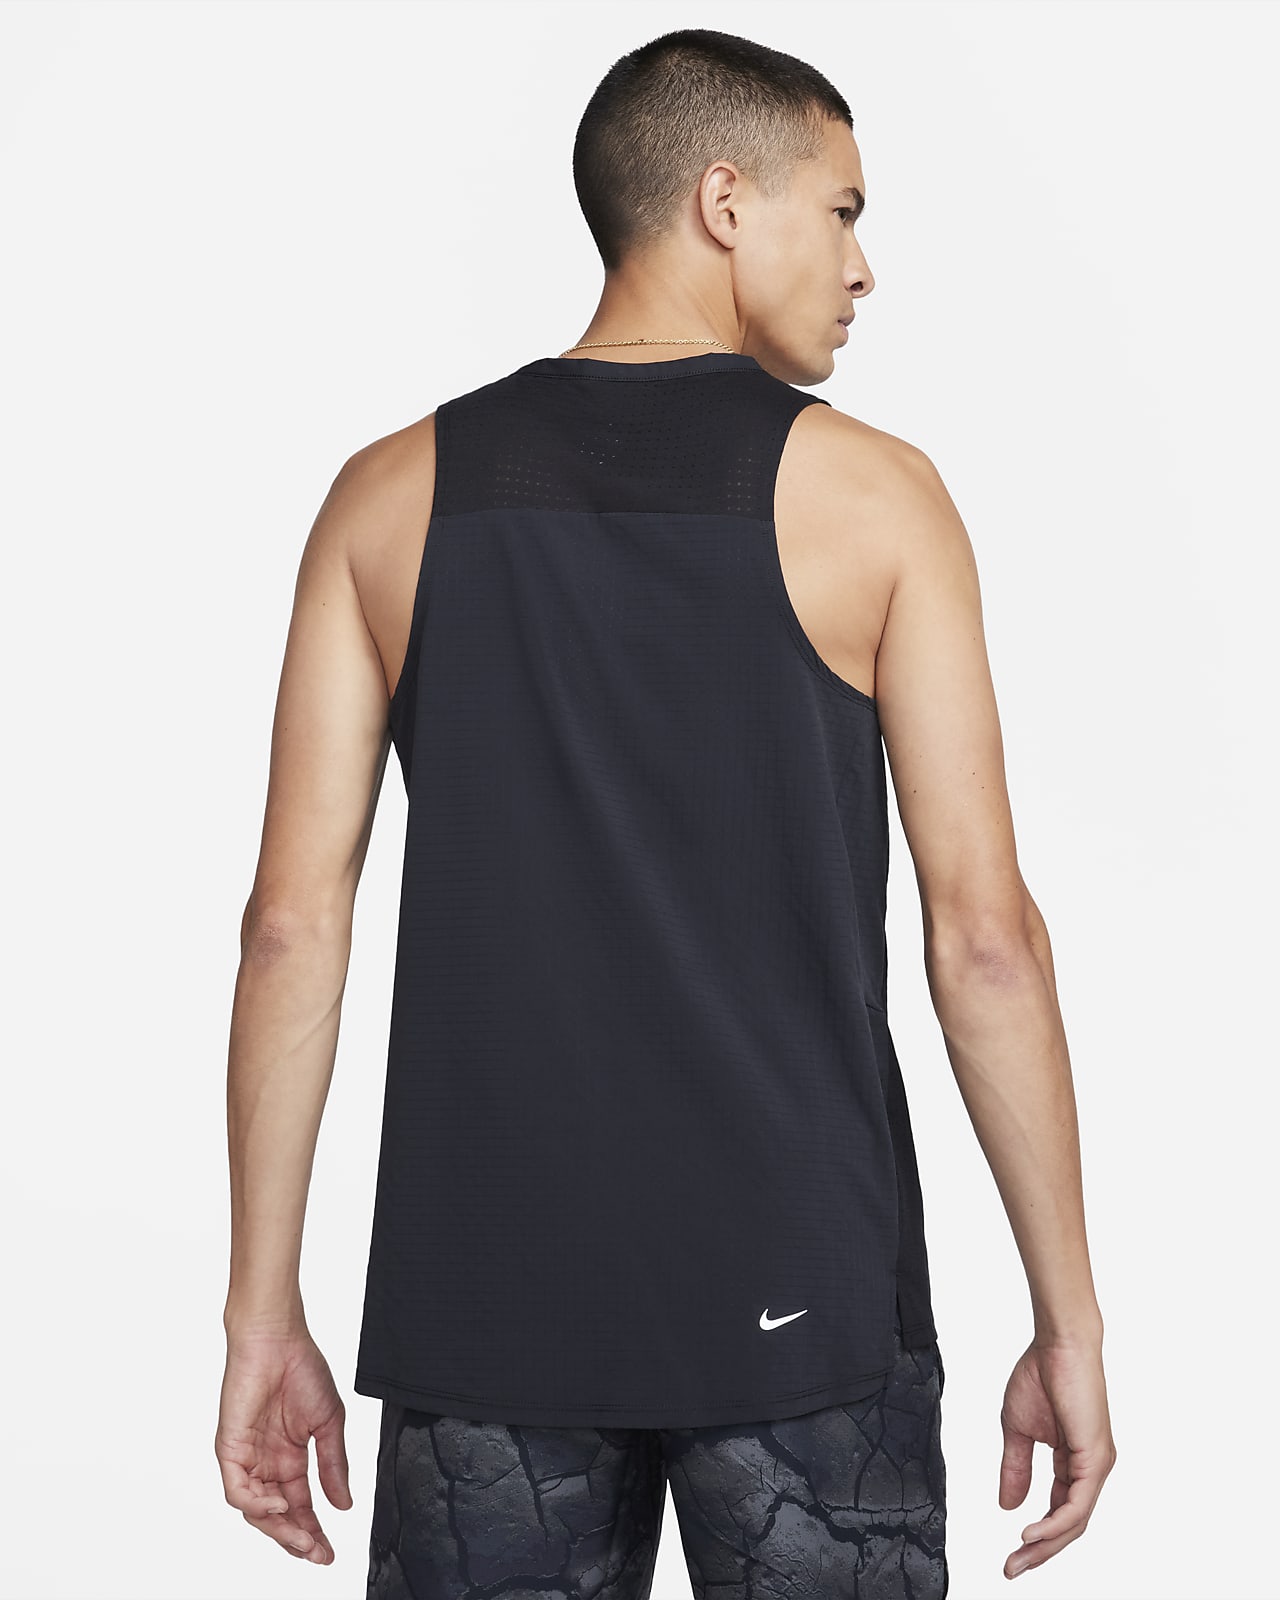 CAMISOLE NIKE PRO DRI-FIT HOMME - Sports Contact